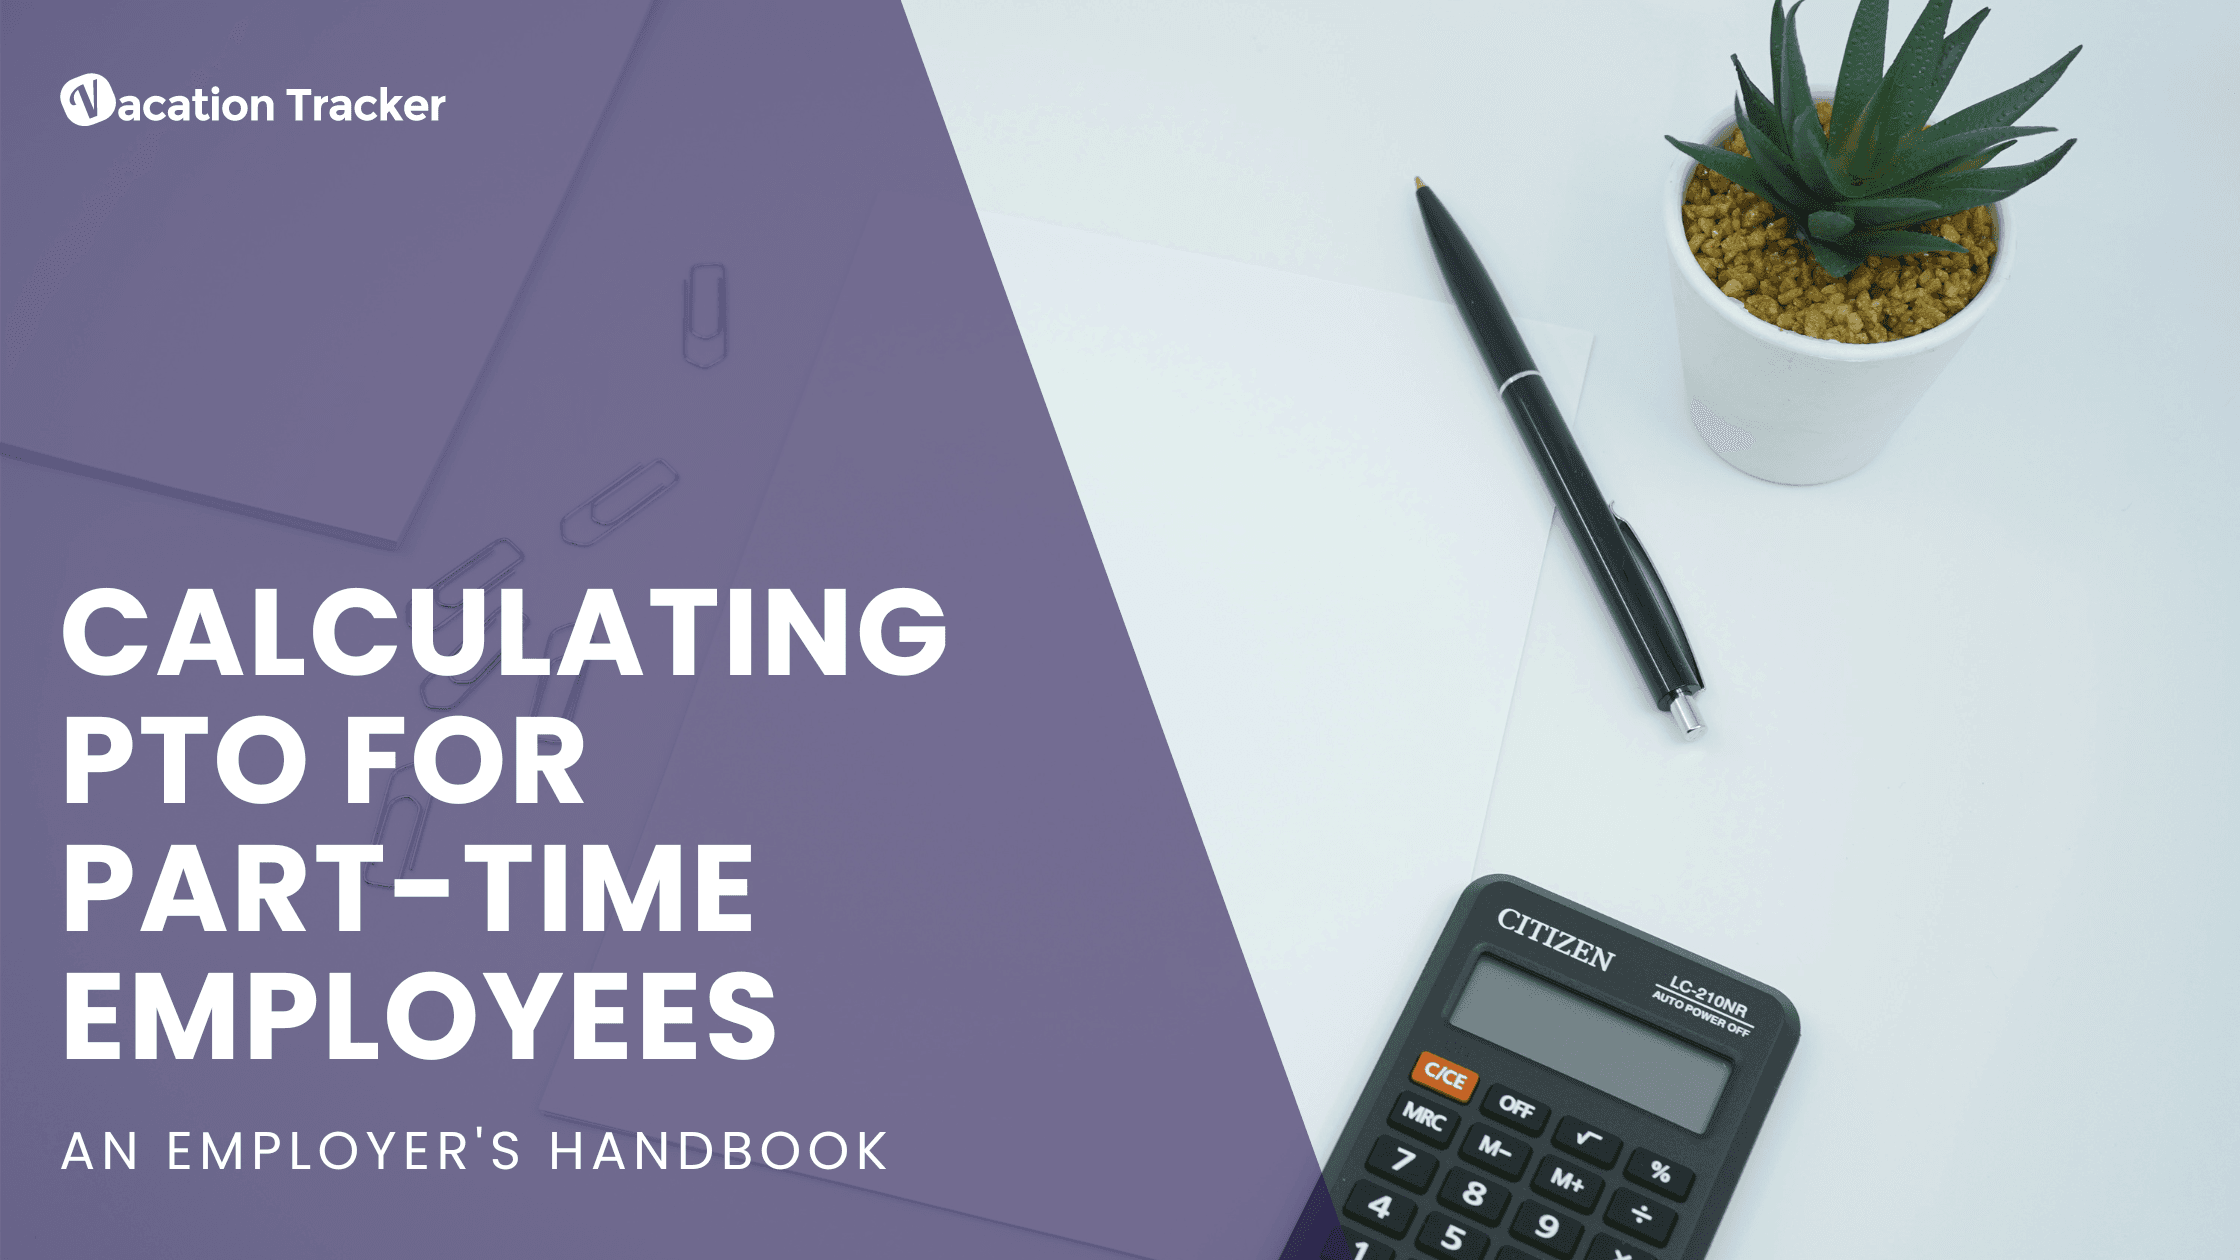 Calculating PTO for Part-Time Employees - An Employer's Handbook